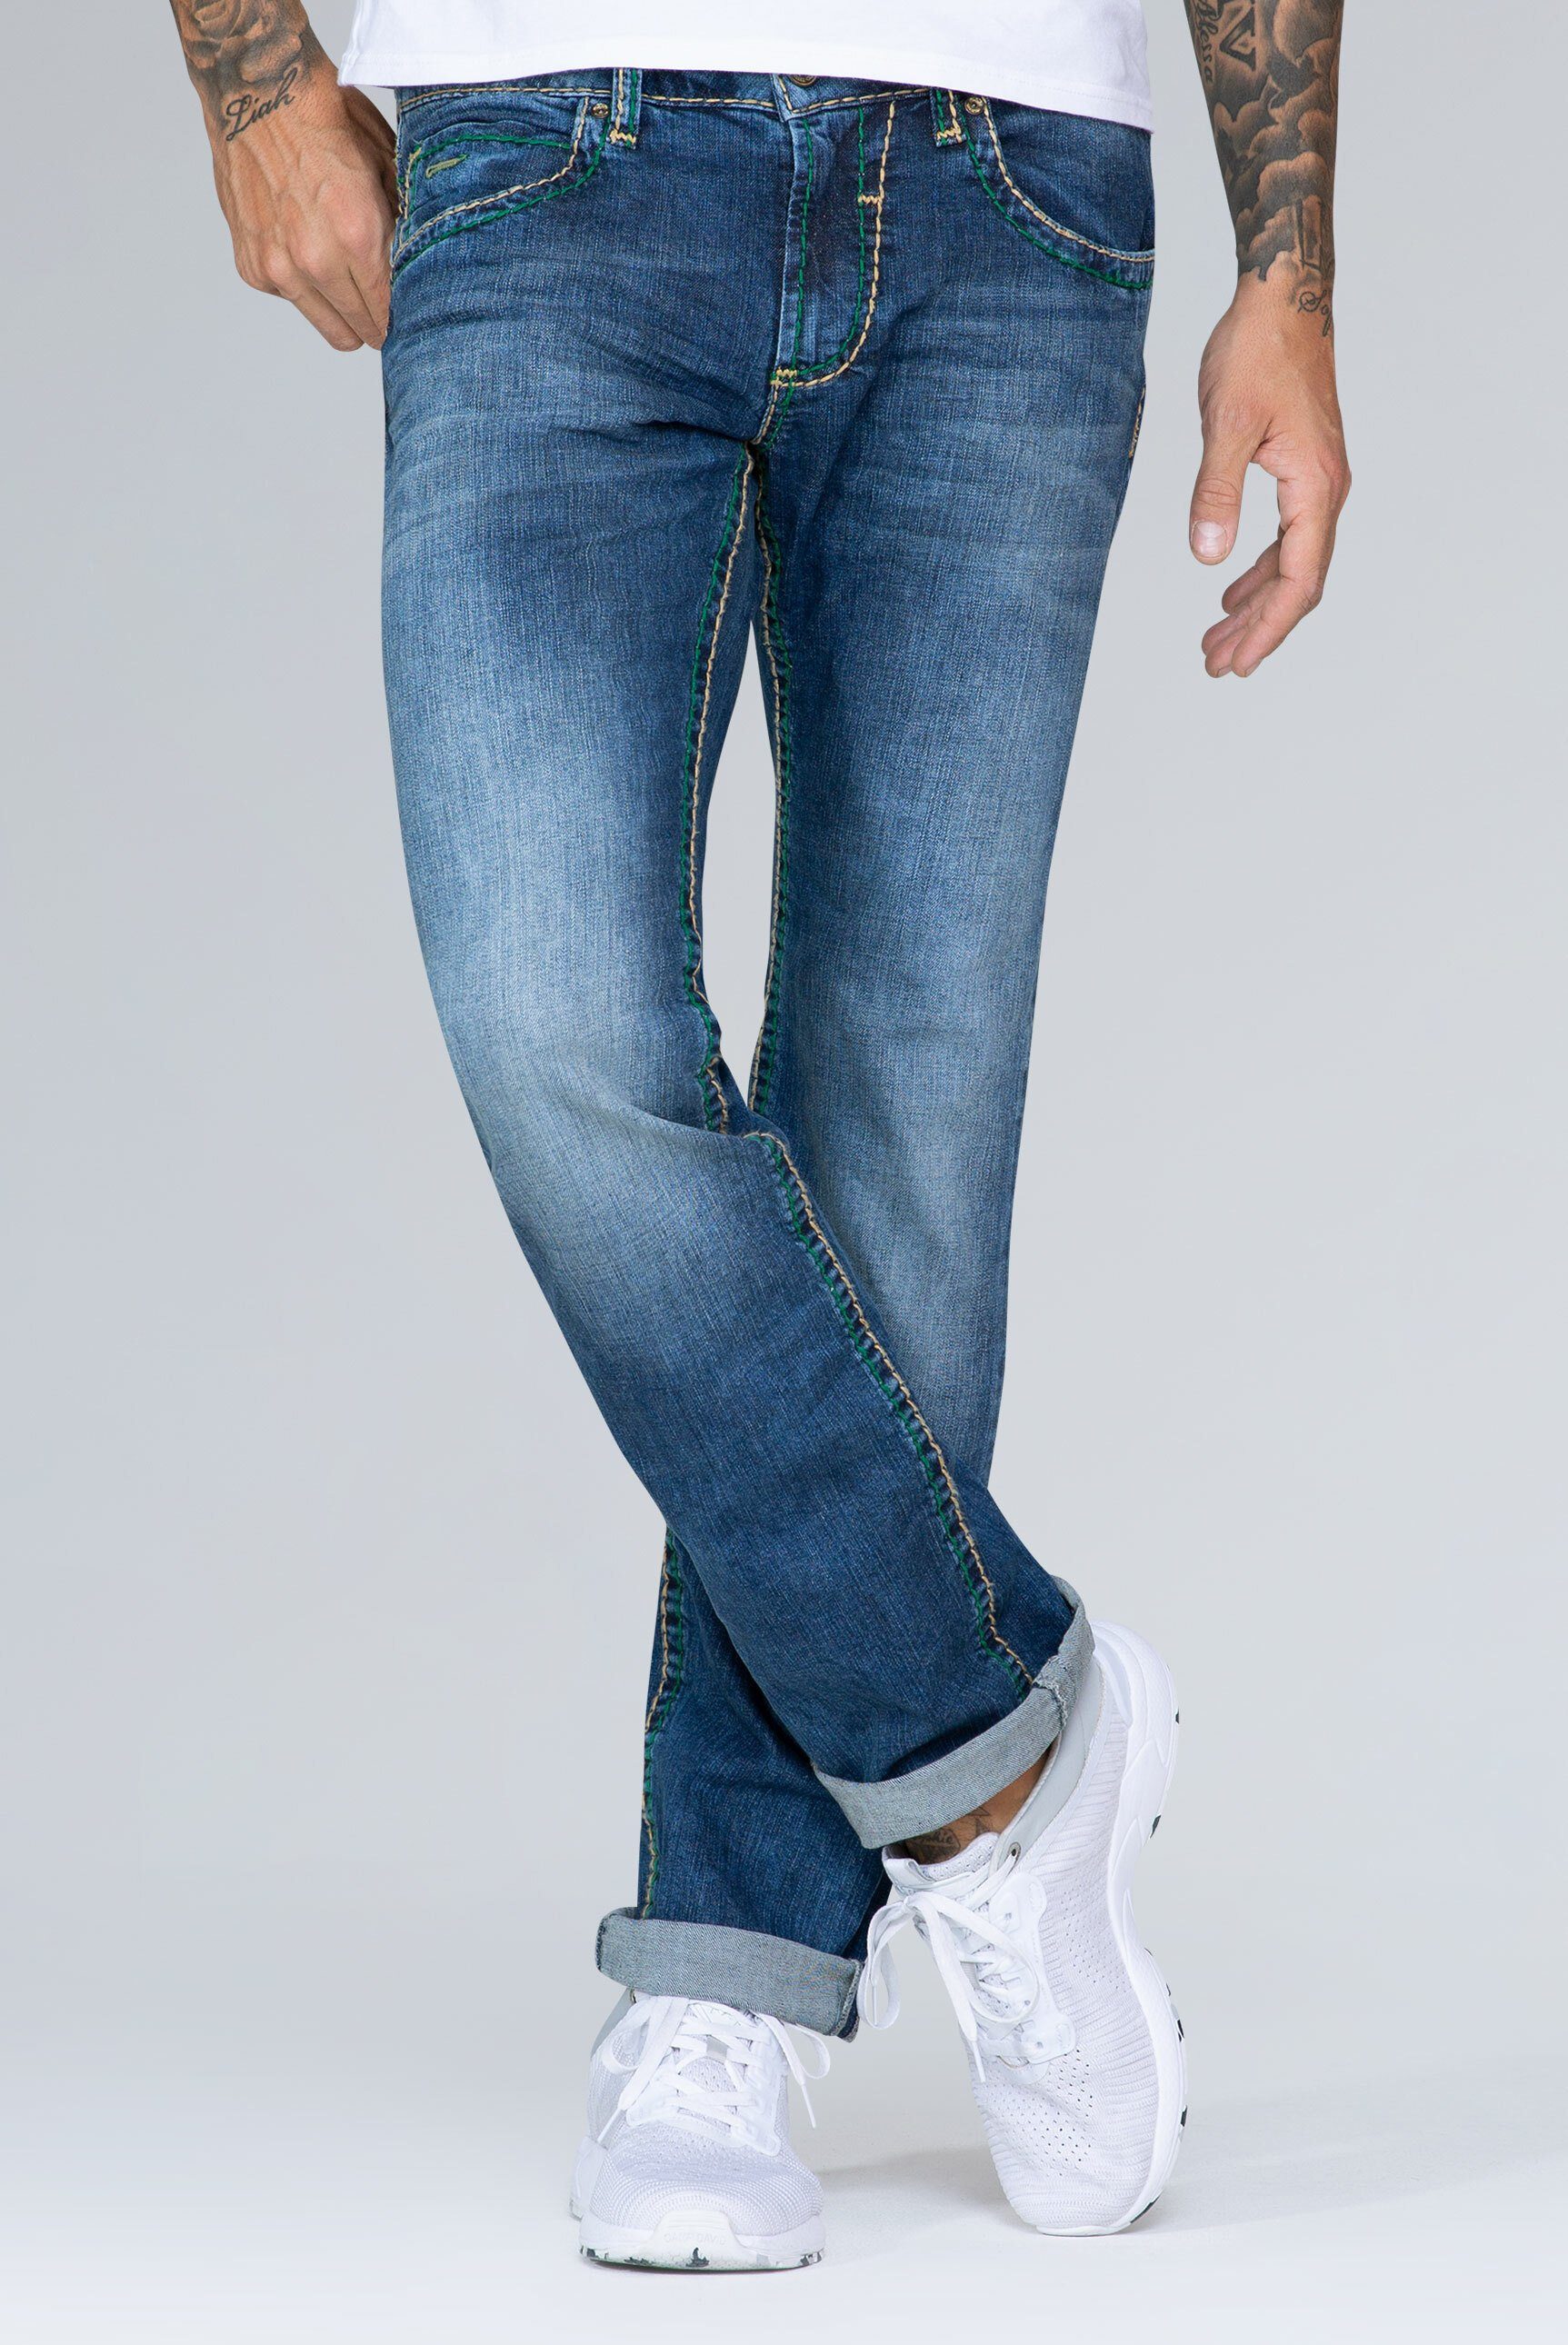 Used-Waschung NI:CO DAVID mit CAMP Regular-fit-Jeans